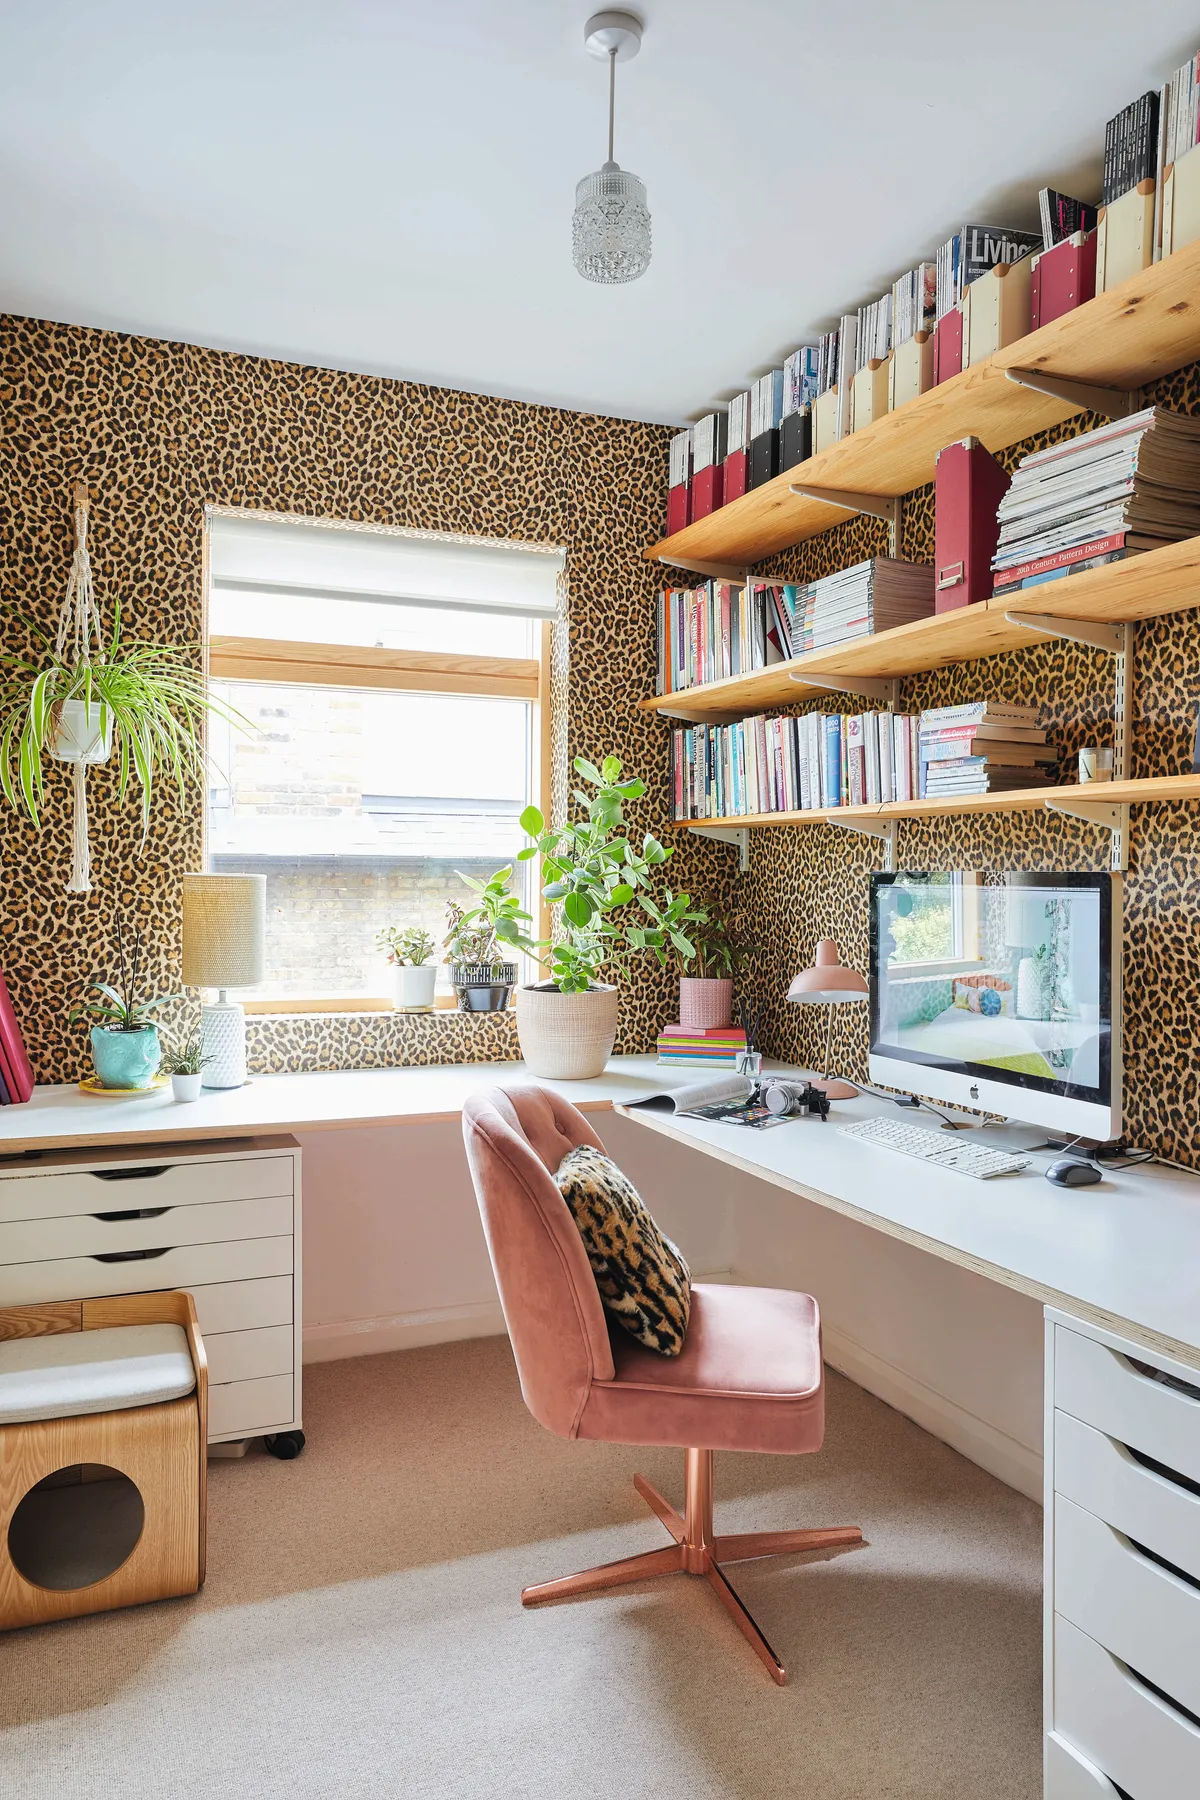 ‘In lockdown this room has been a godsend,’ Bo says. Leopard-print wallpaper from Albany gives the room a fun, bold look with the pink swivel chair from Cult Furniture topping off the glam style. A made-to-measure desk and shelving provides Bo with plenty of work and storage space